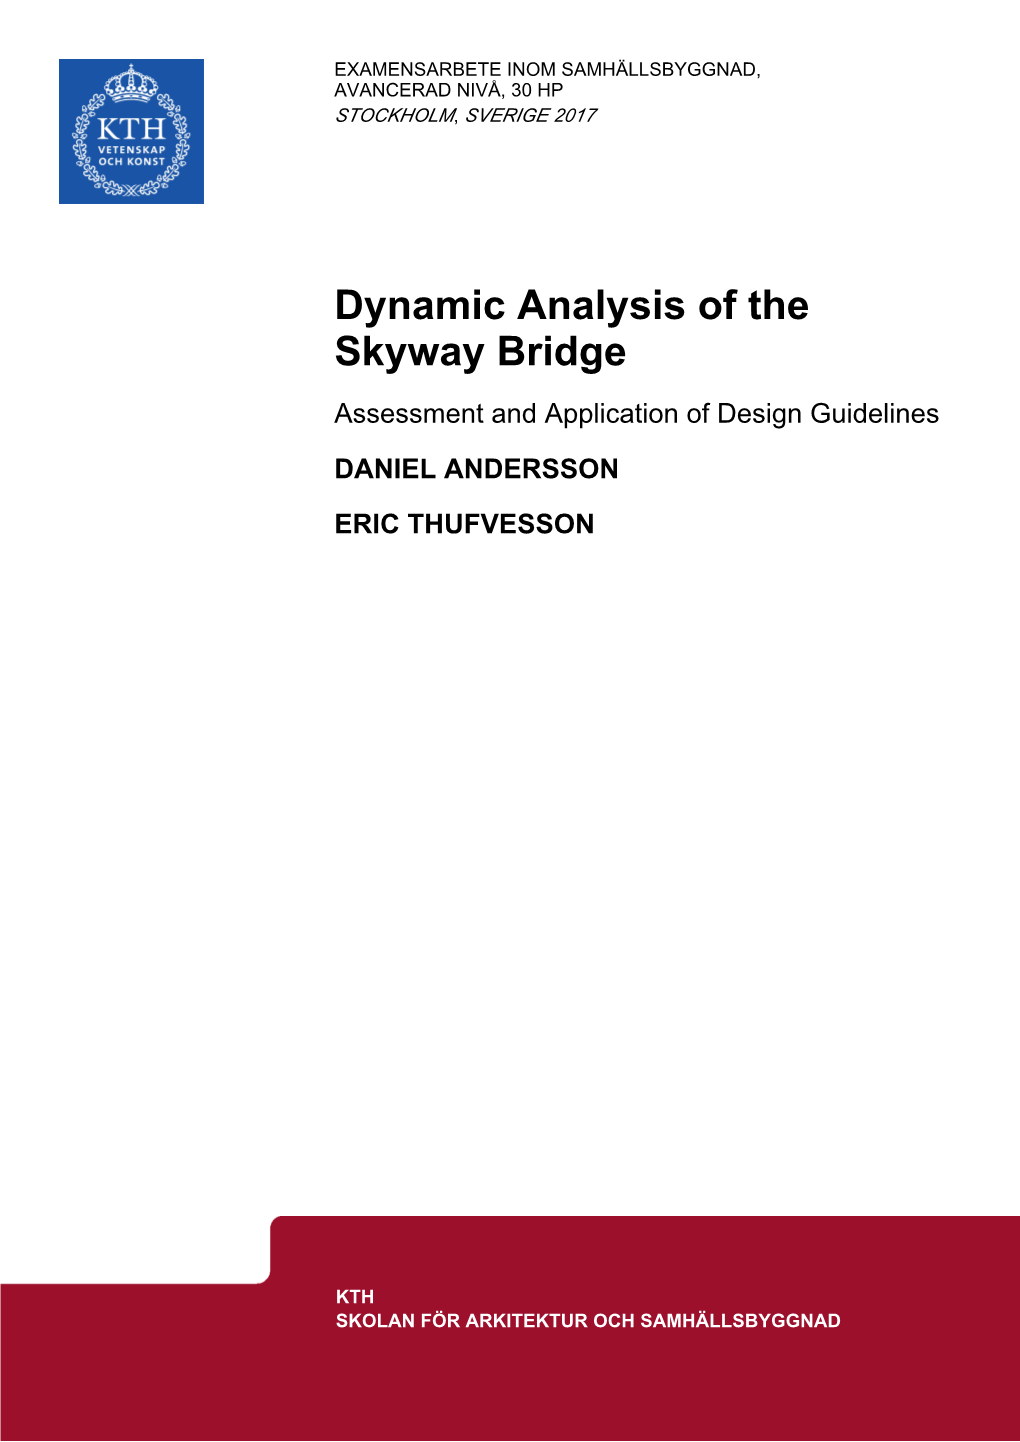 Dynamic Analysis of the Skyway Bridge Assessment and Application of Design Guidelines